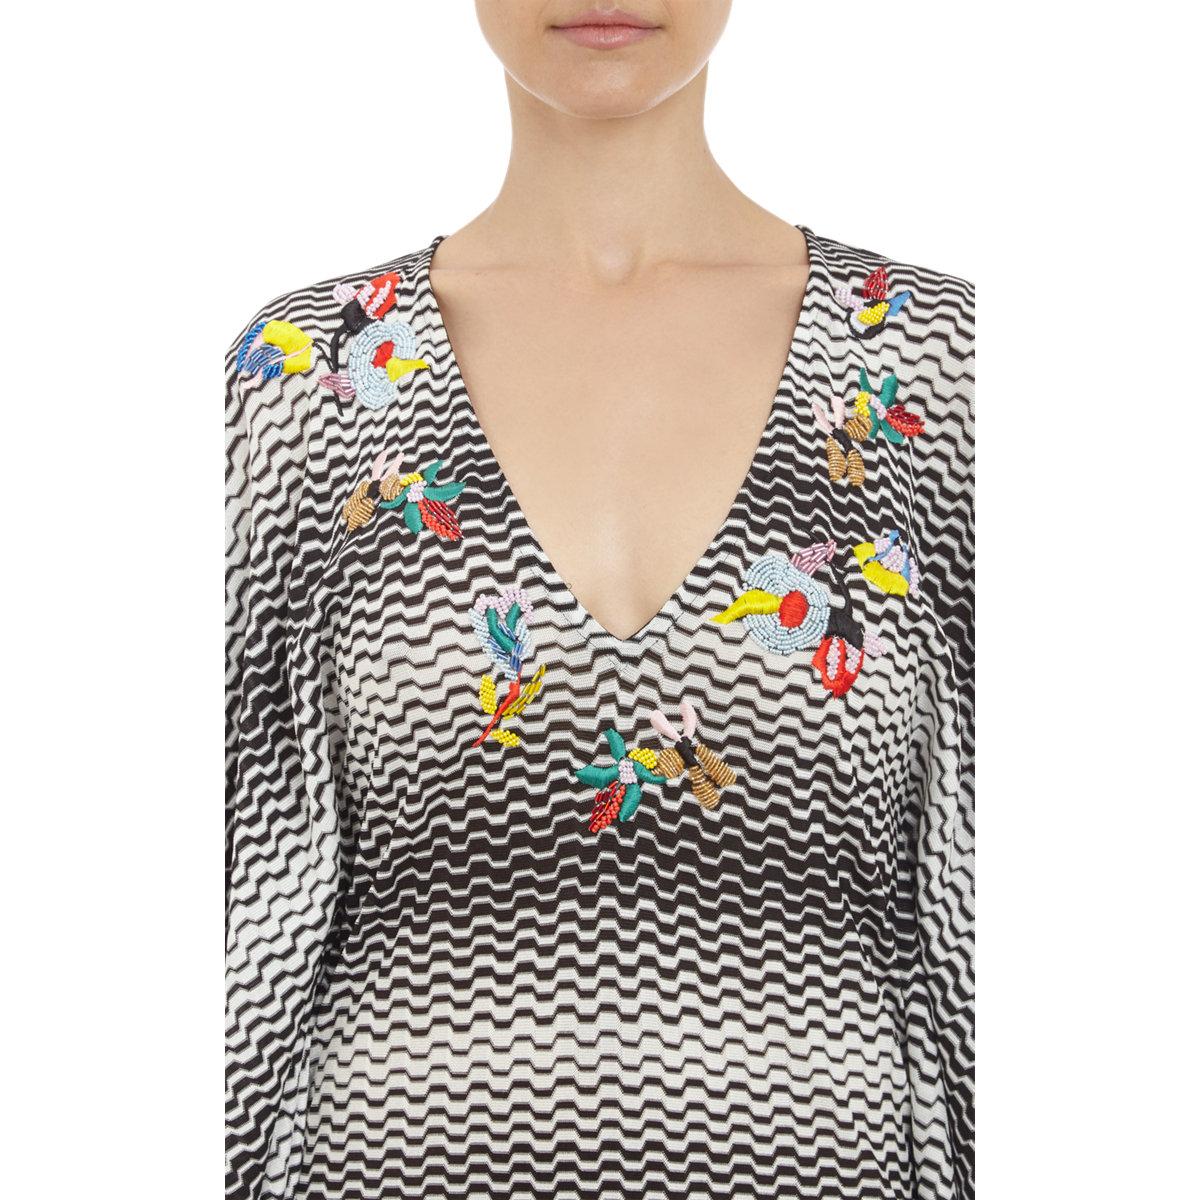 NEW Missoni Hand-Embroidered Chevron Crochet Knit Dress Kaftan Tunic Cover Up 46 For Sale 7